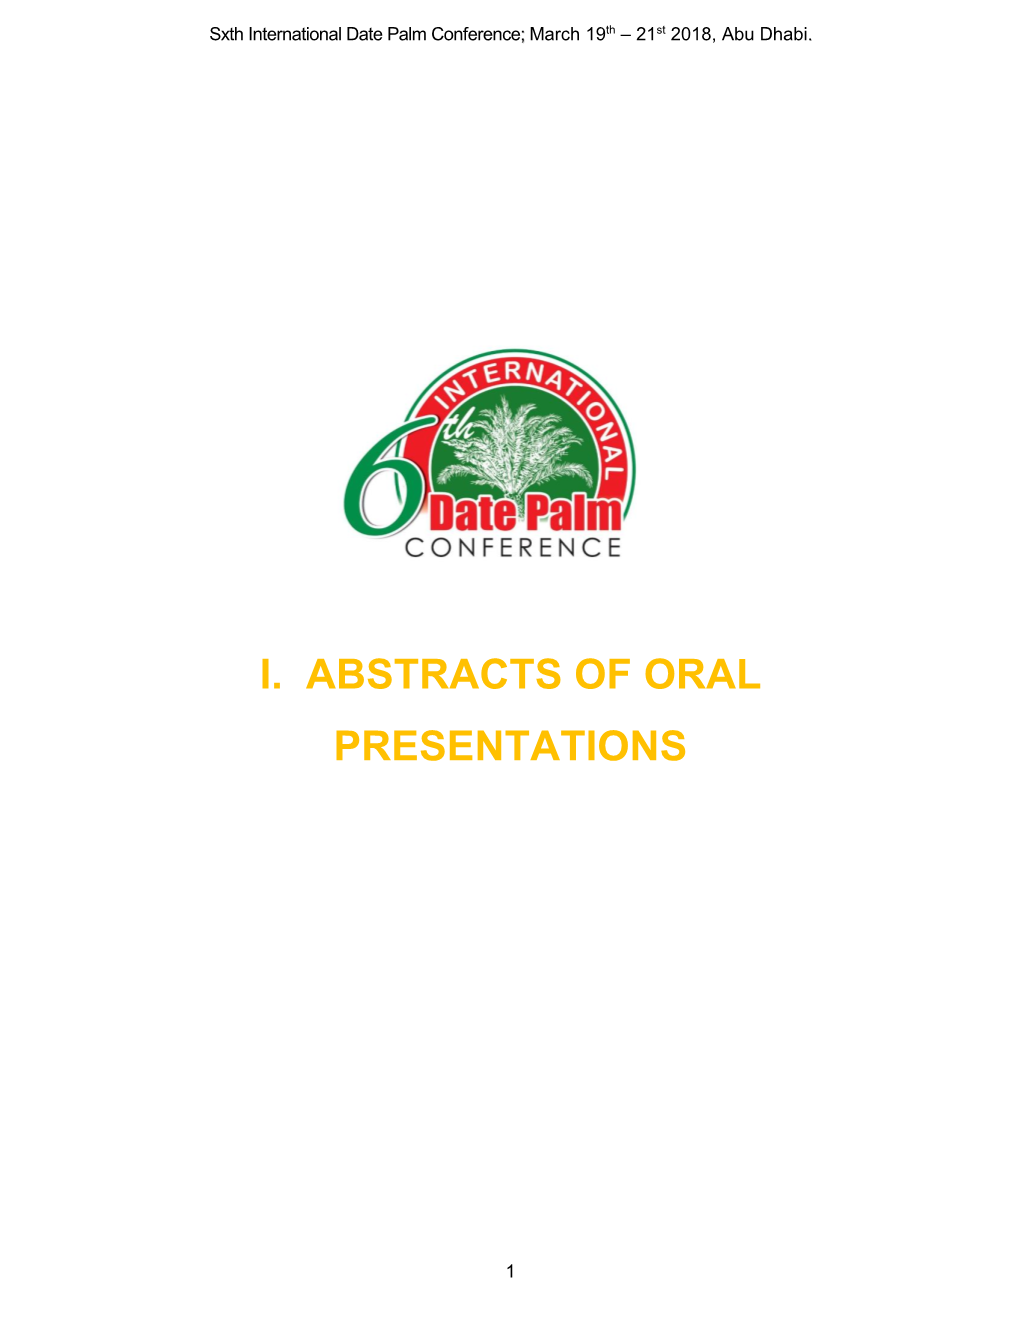 I. Abstracts of Oral Presentations